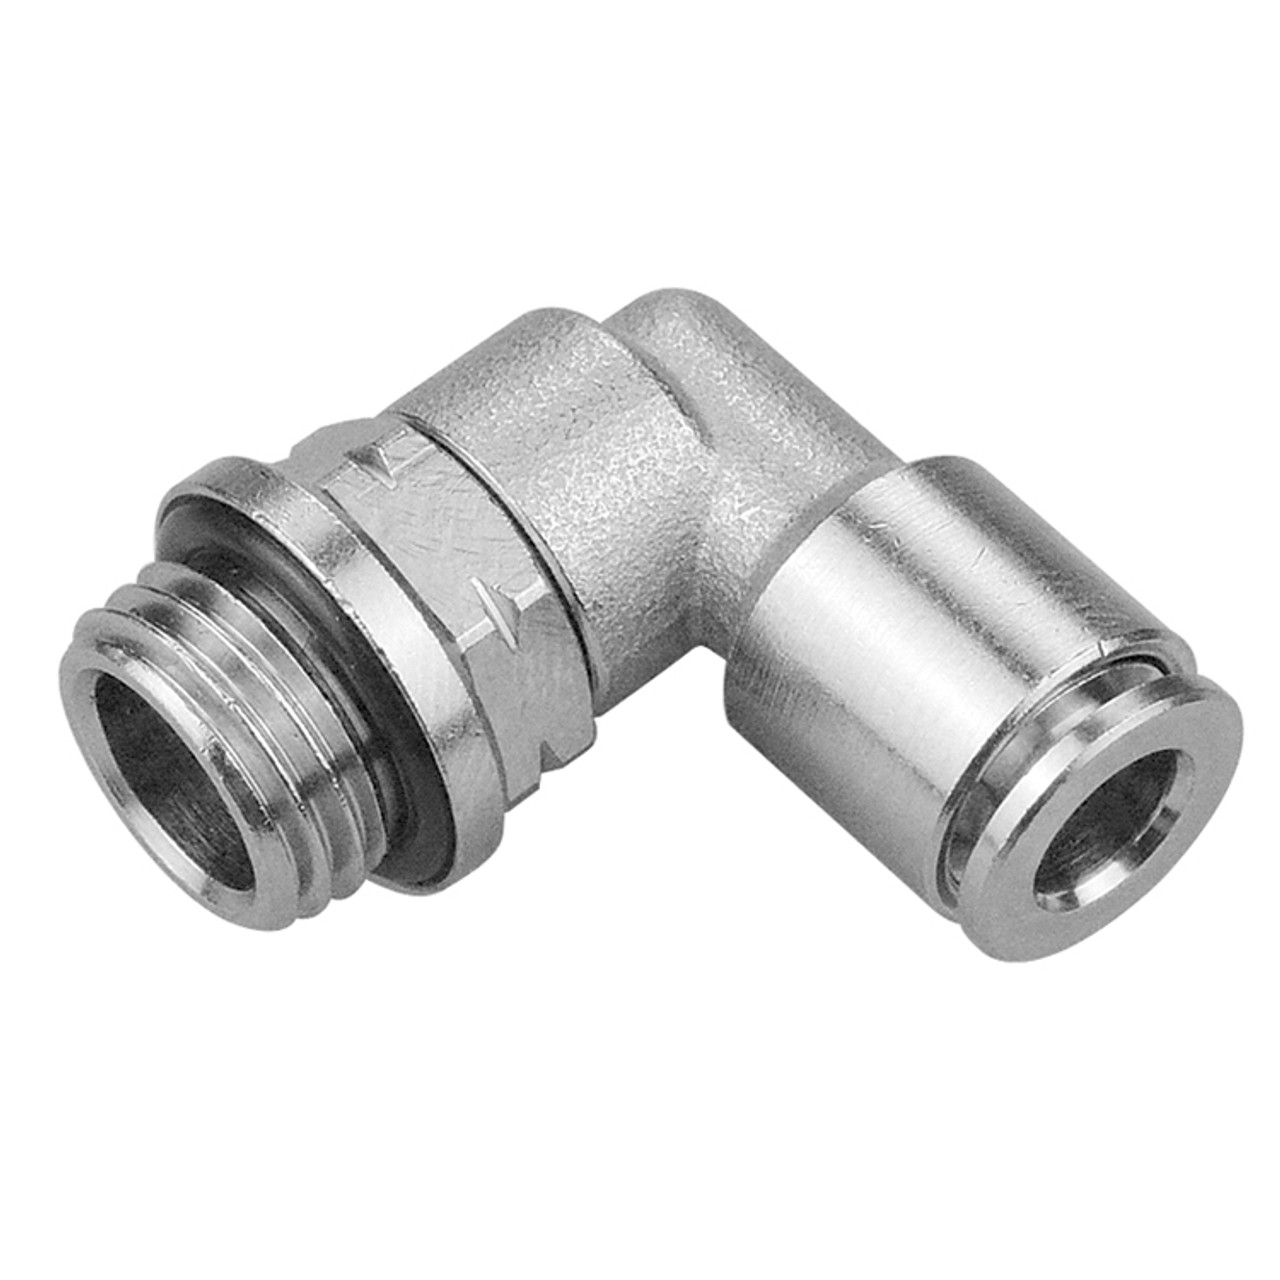 1/4 x 1/4" Nickel Plated Brass Uni Thread - Push-To-Connect 90° Elbow   G60918P-04-04